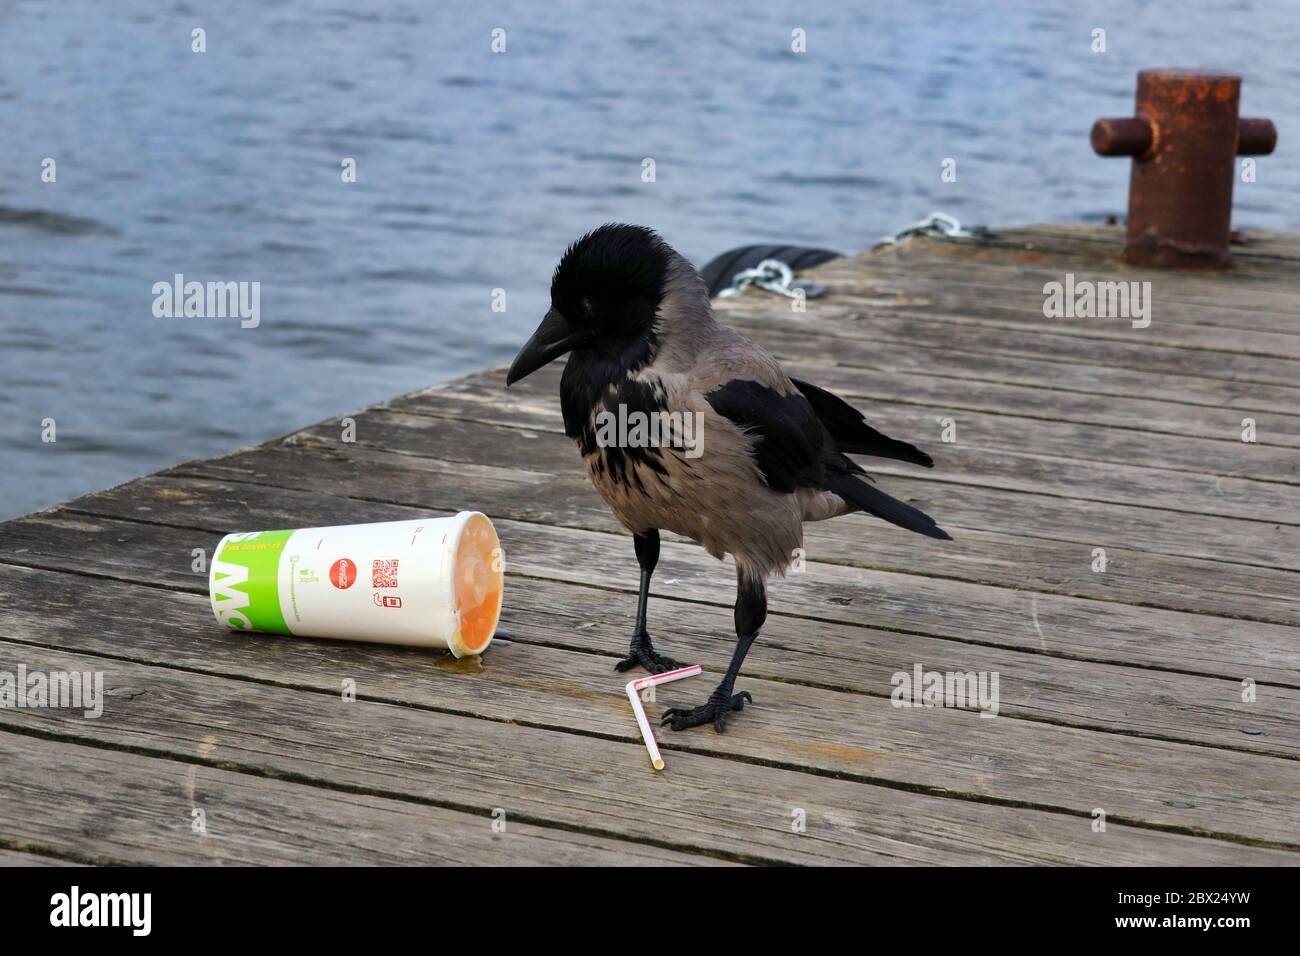 Hooded crow, corvus cornix, re-evaluates McDonalds soft drink container and seems to decide that the yellow soda drink is probably not good for crows. Stock Photo